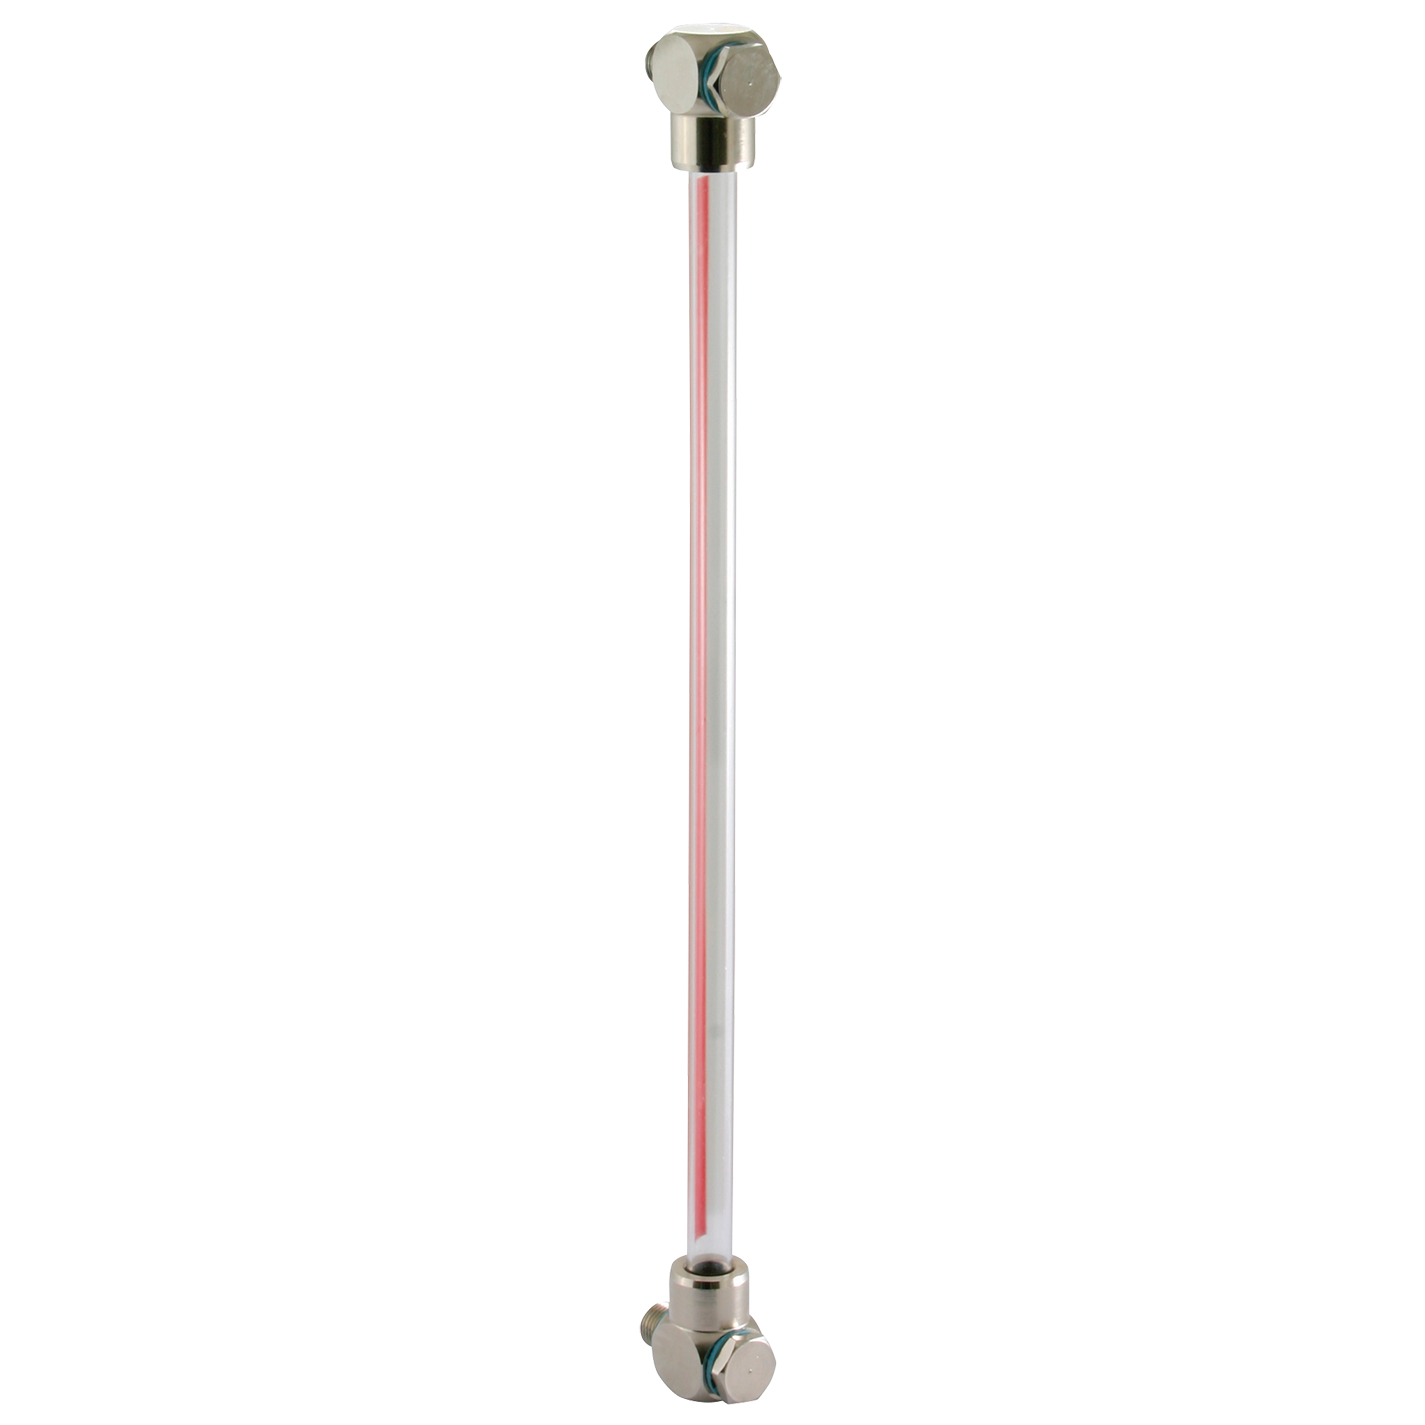 1/2" BSP Fluid Level Gauge W/O Thermometer Centres 200mm